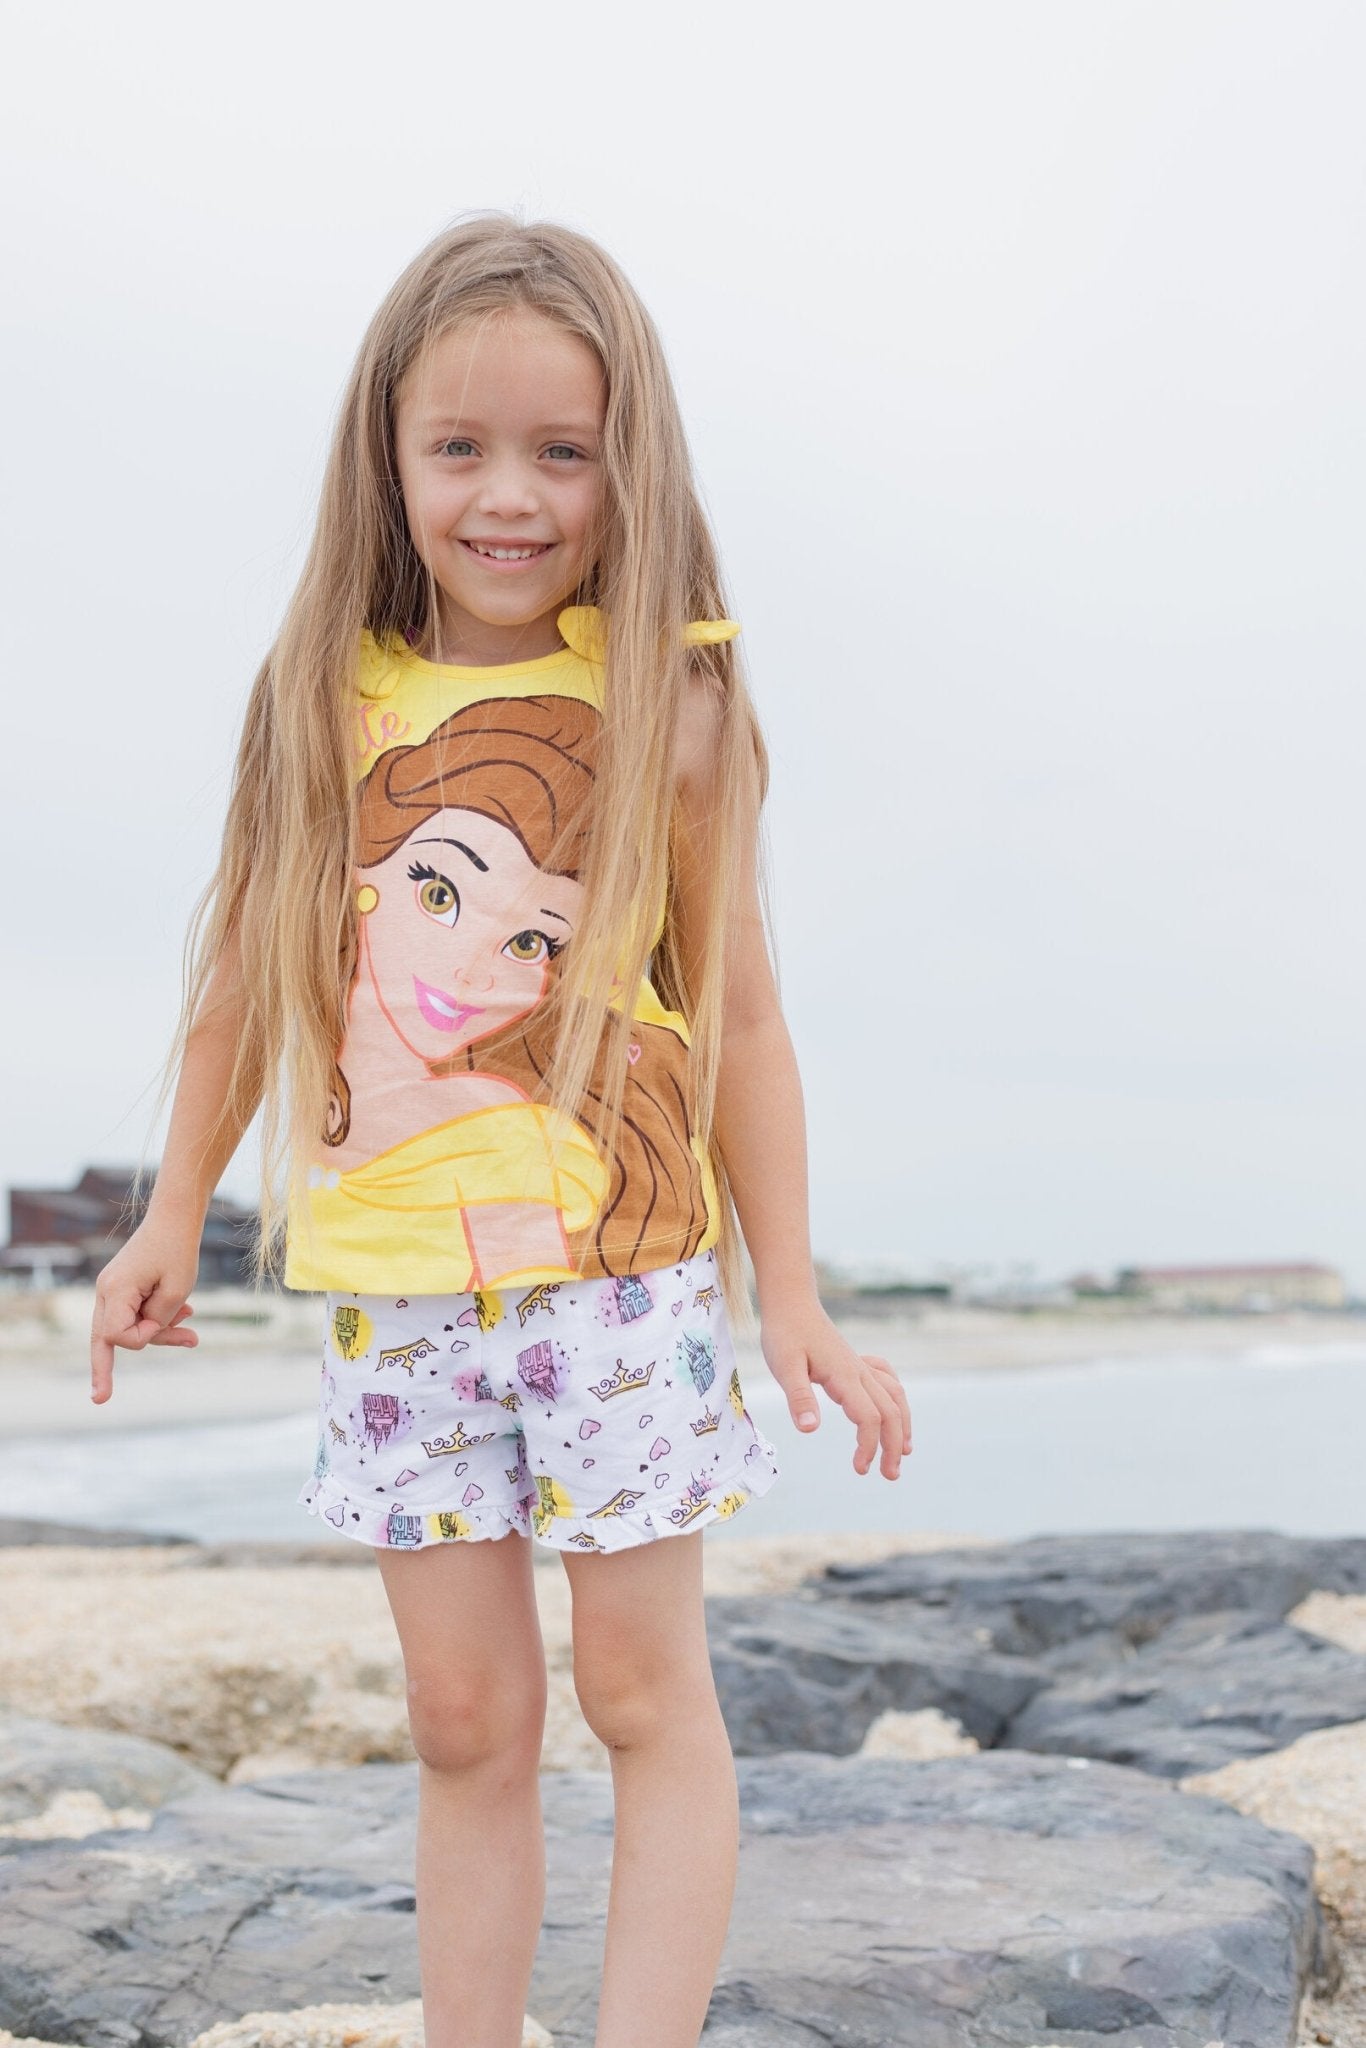 Disney Princess Belle Tank Top and French Terry Shorts Outfit Set - imagikids